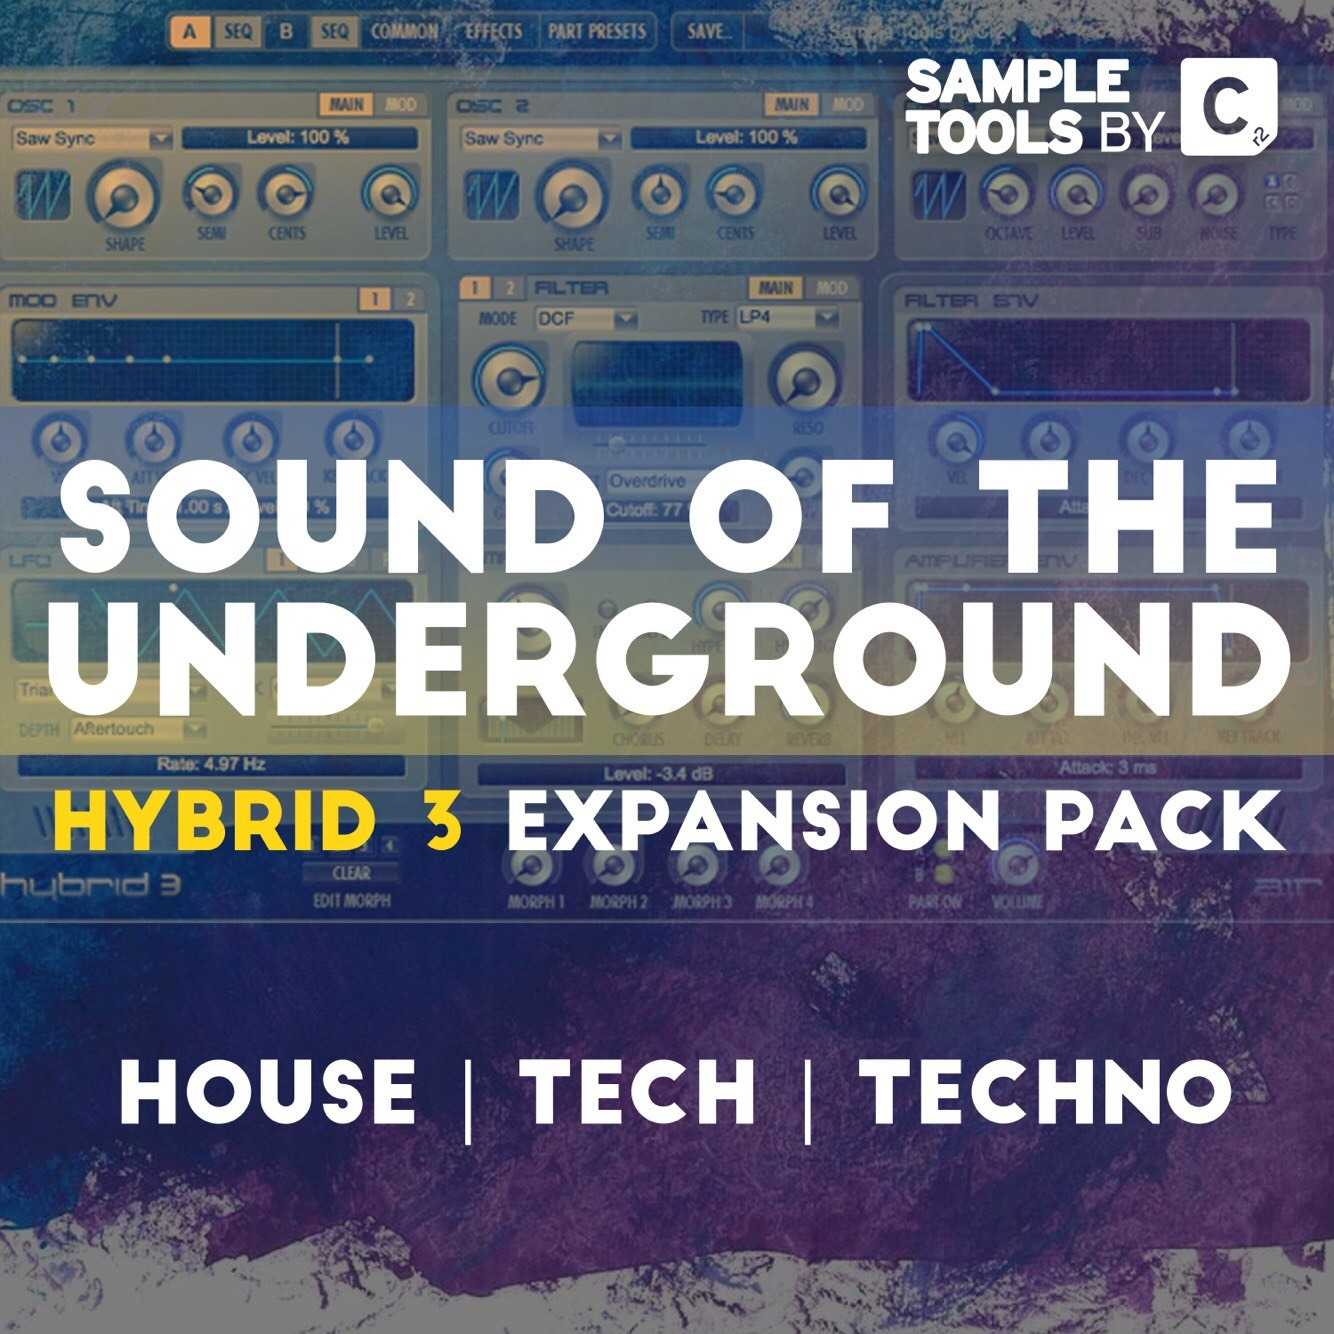 Sound of the Underground Expansion Pack